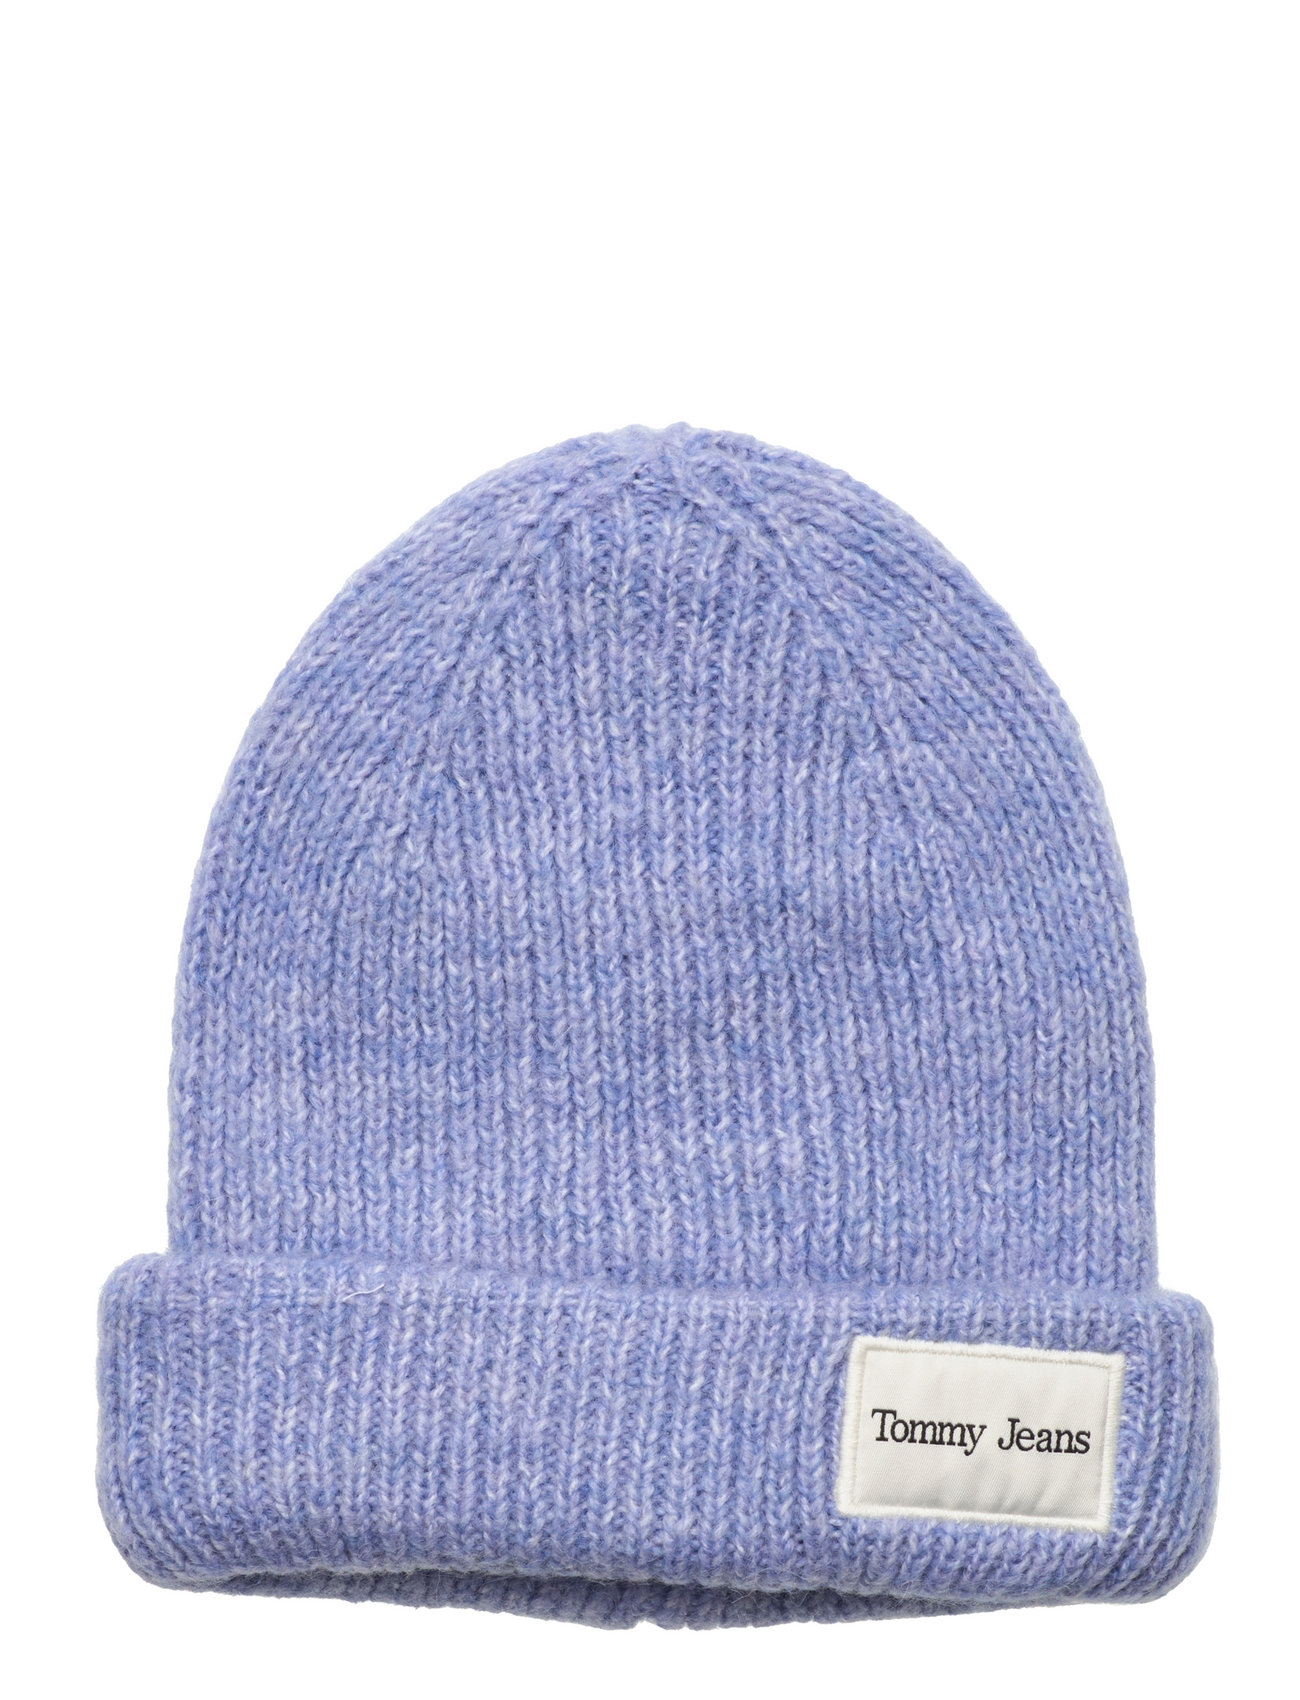 Tommy Hilfiger Tjw Sport Elevated Beanie - Hats